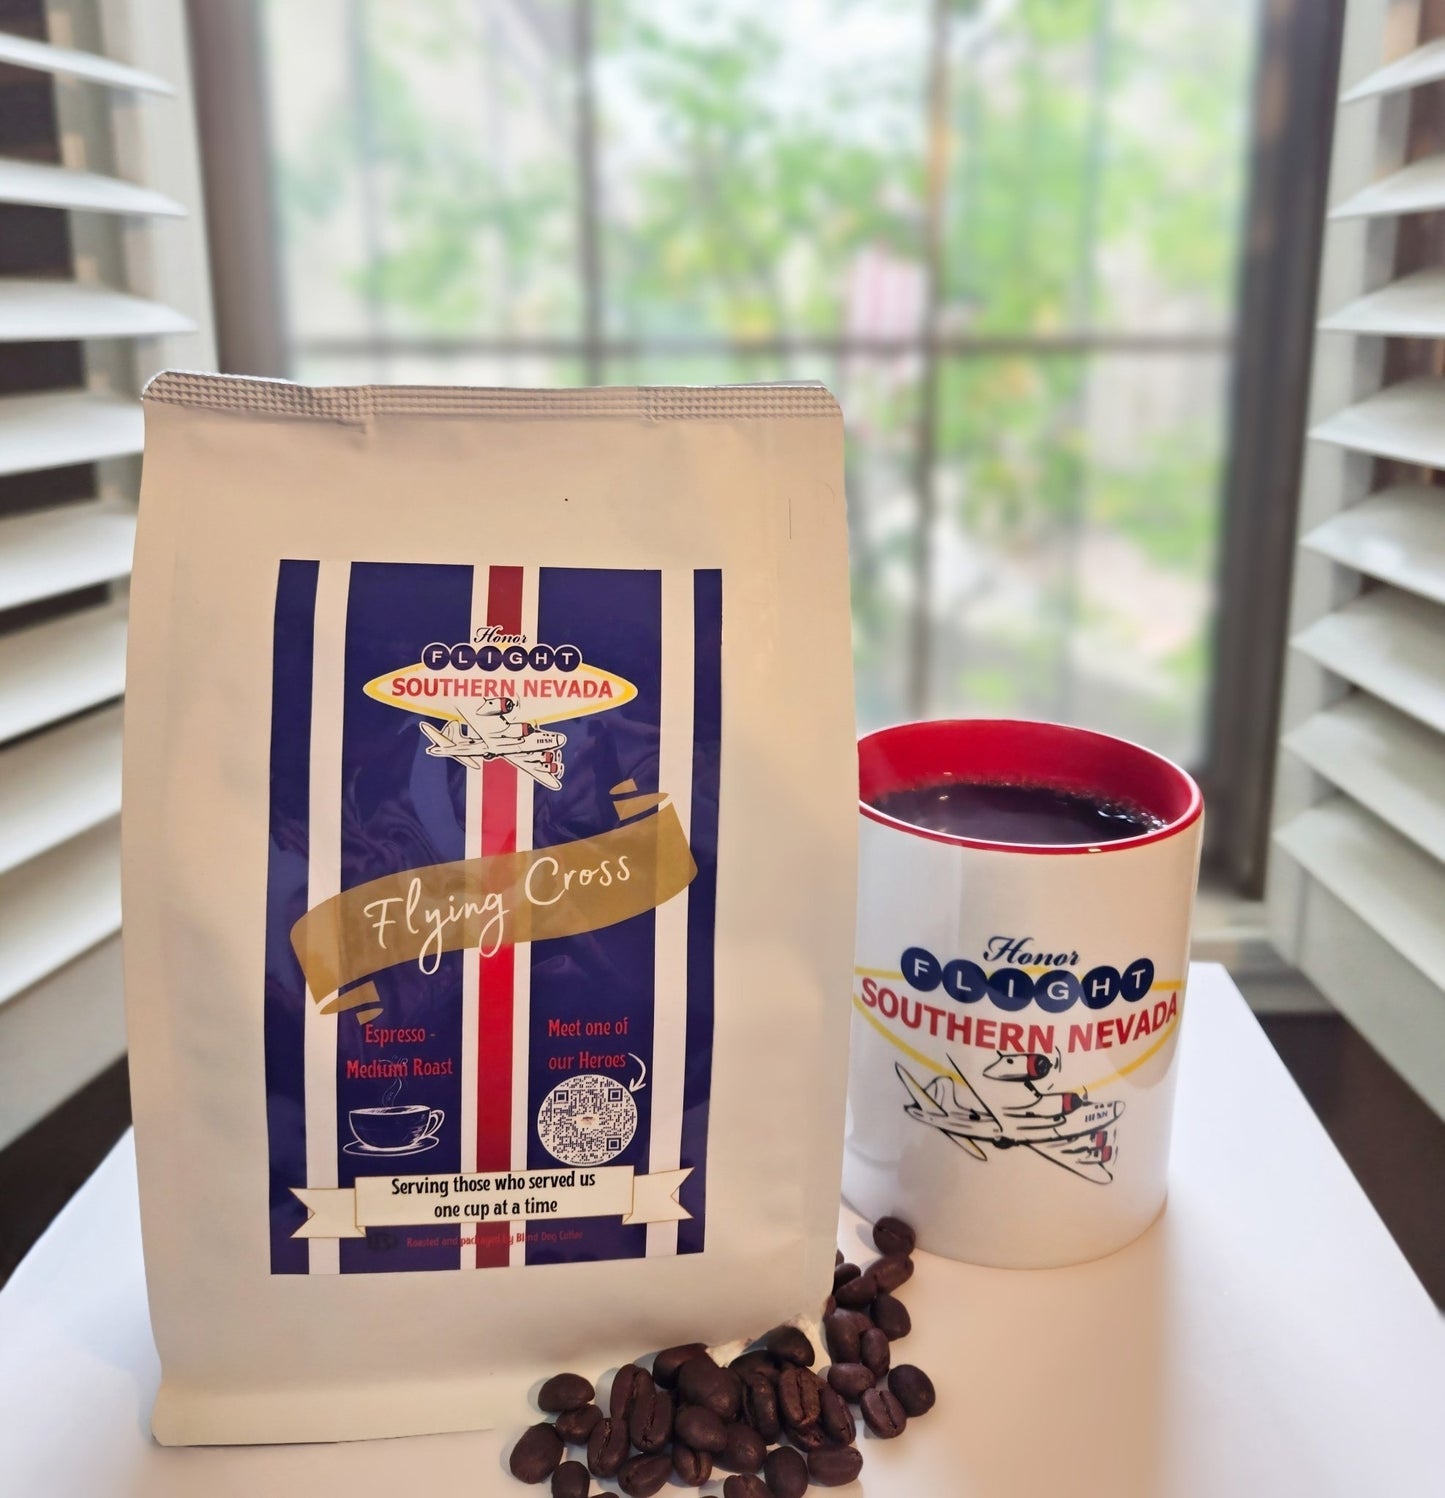 Flying Cross - Espresso Roast - My Cause My GiftMy Cause My Gift